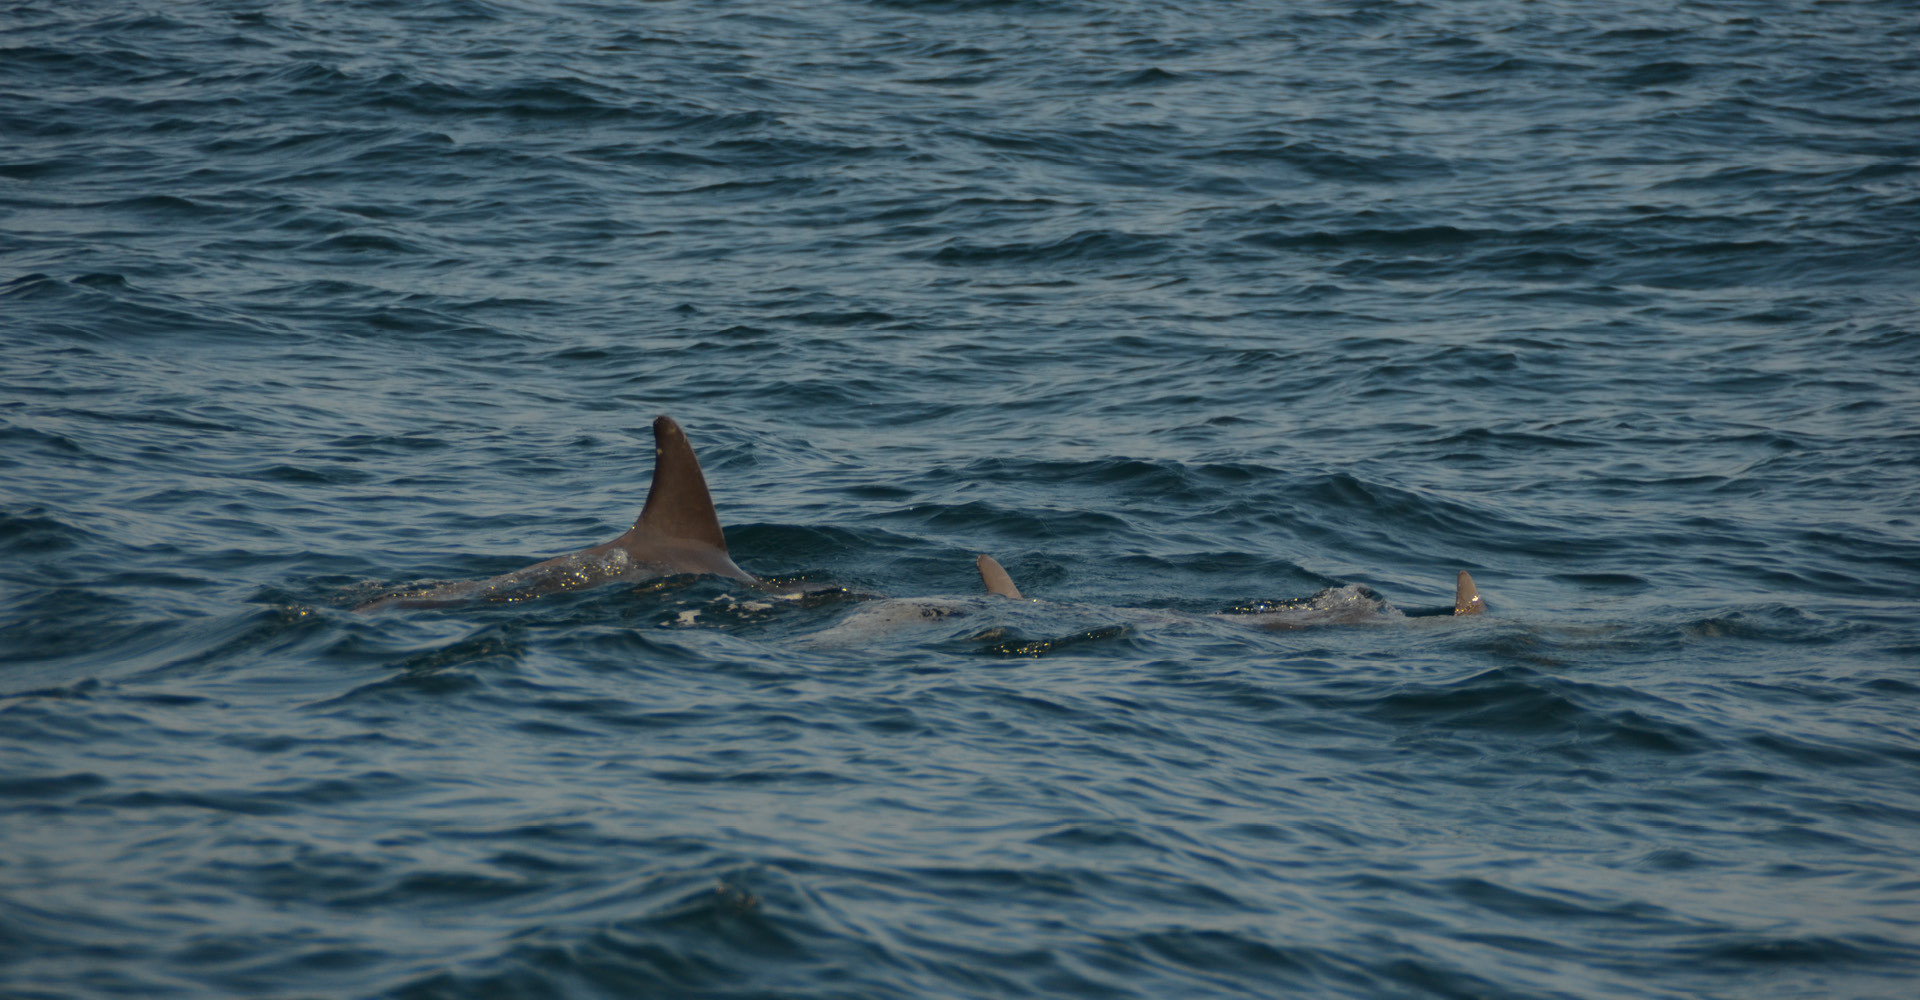 Dolphin fins appearing on the waters surface